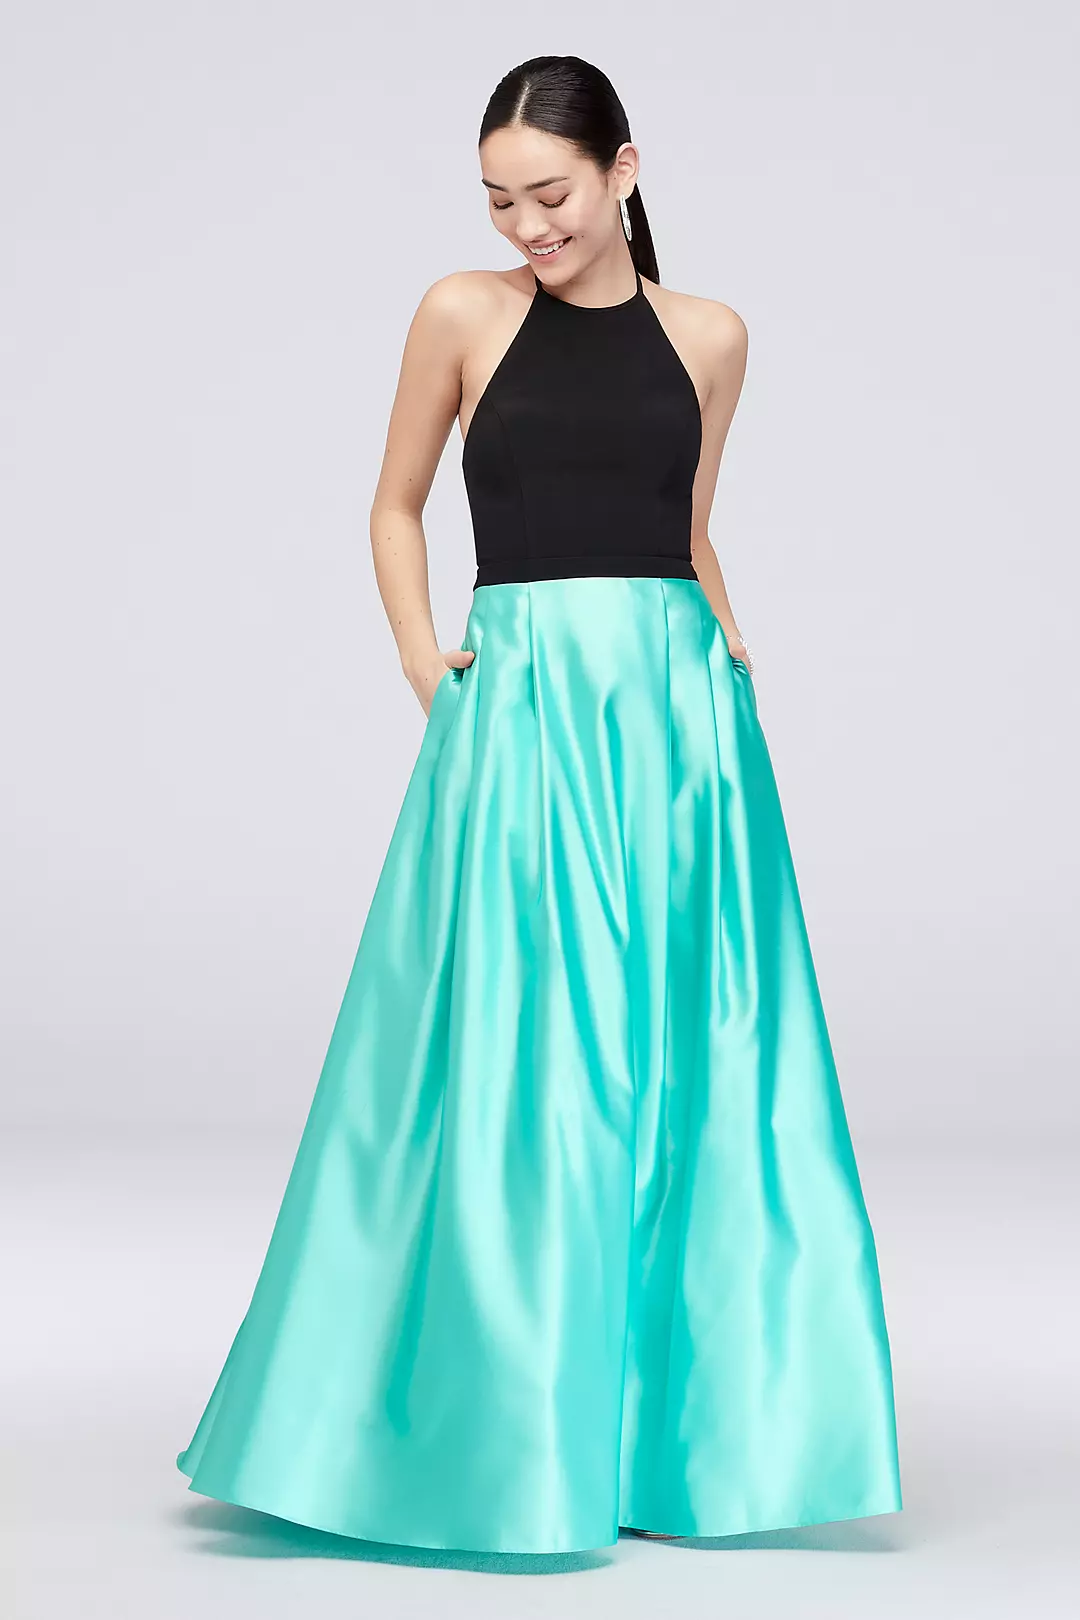 Satin Skirt and Halter Top Ball Gown with Pockets Image